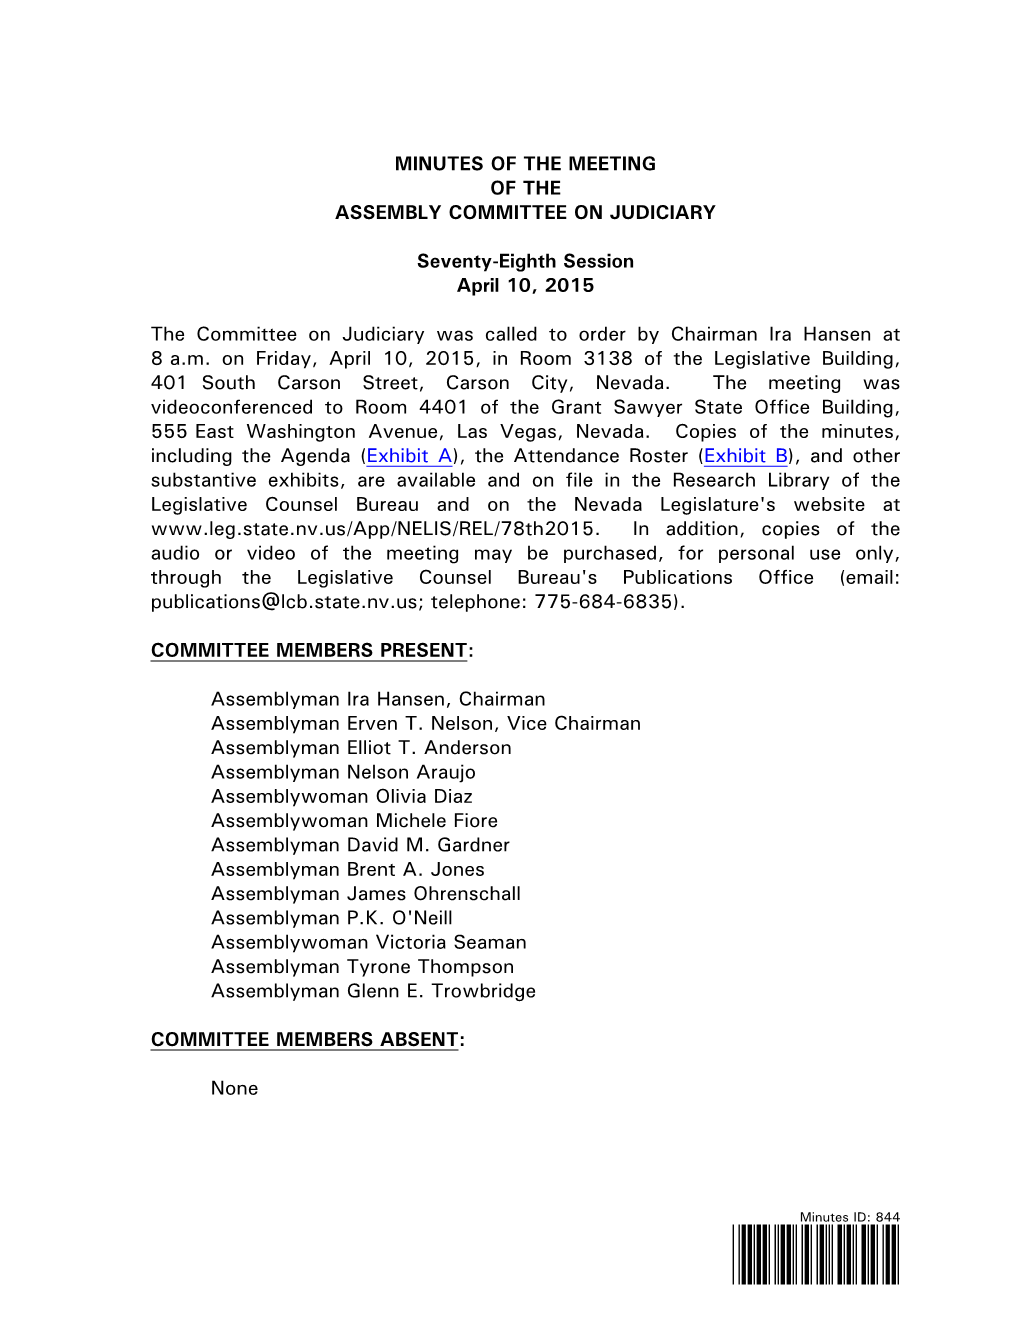 Assembly Committee on Judiciary-April 10, 2015